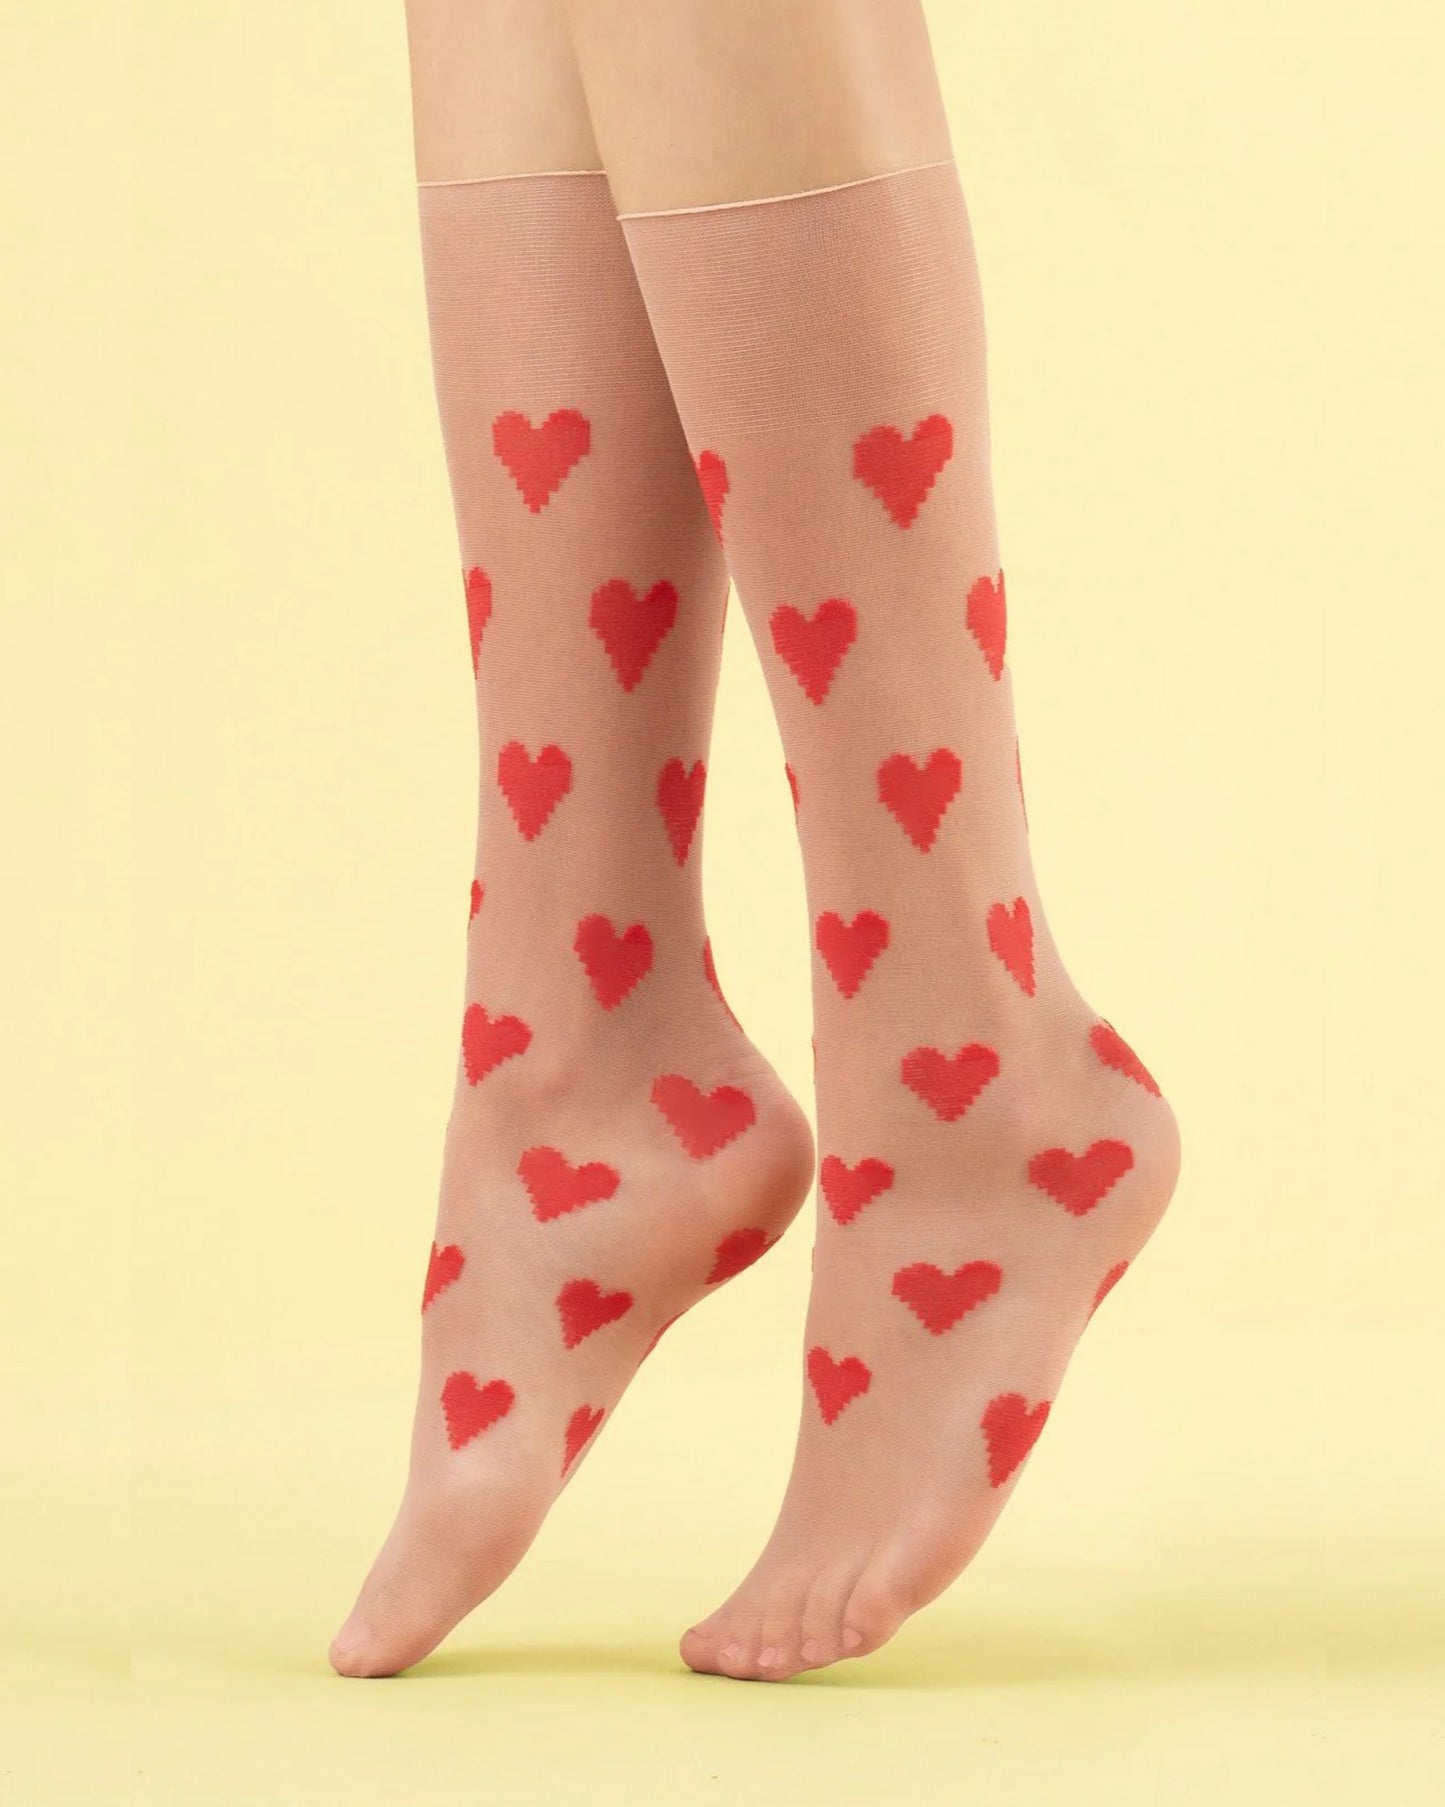 Fiore Love Me Sock - Sheer nude fashion knee-high socks with woven red heart pattern and deep comfort.